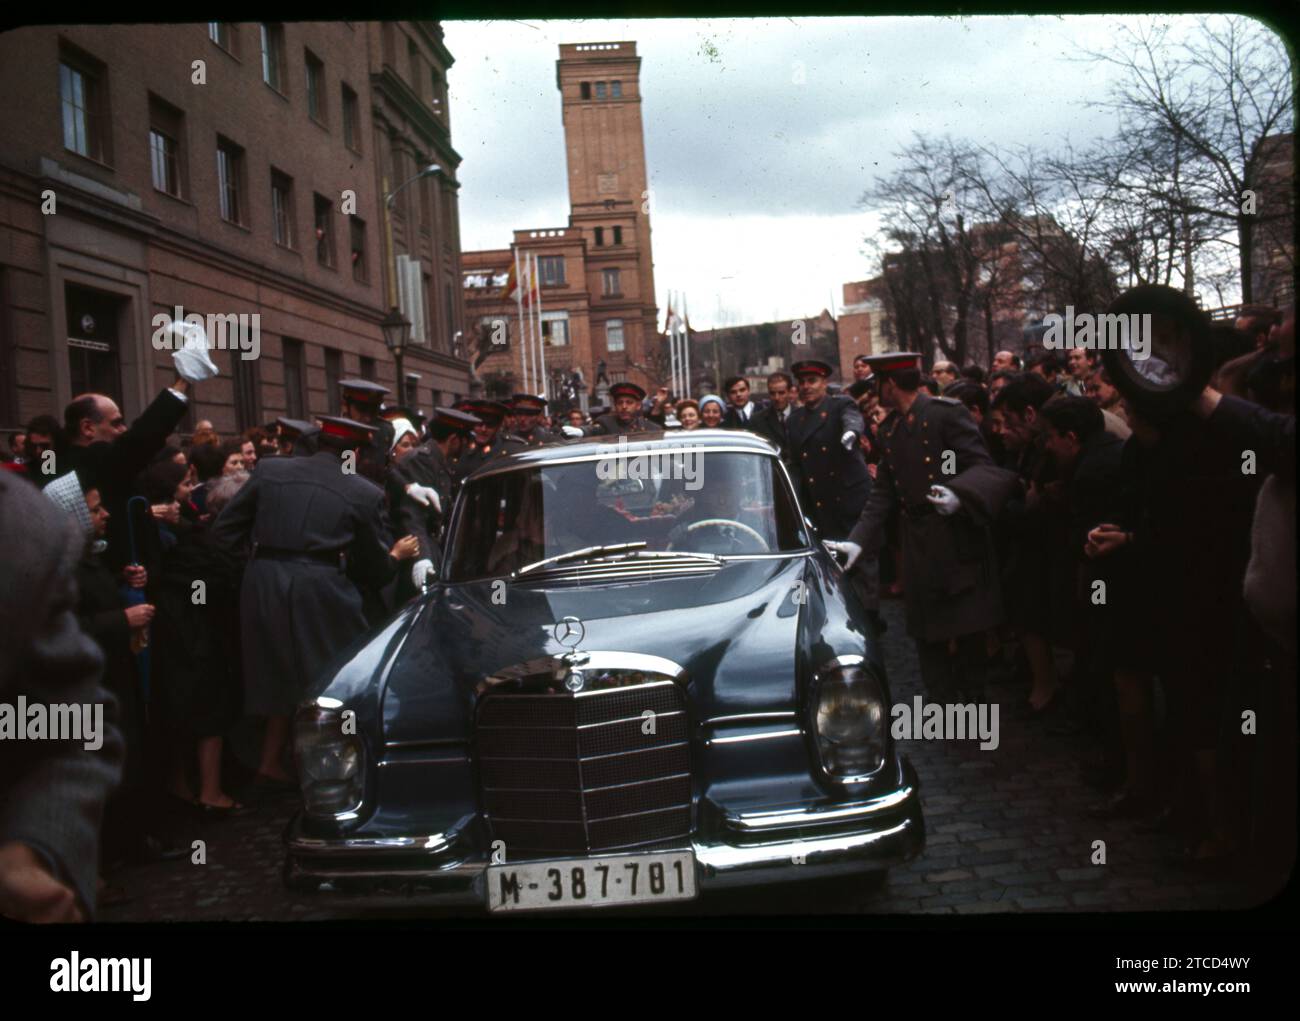 Madrid, 02/09/1968. Queen Victoria Eugenia visits Madrid on the occasion of the birth of her great-grandson, the Infante Don Felipe. In the image, the Queen's visit to the Red Cross. Credit: Album / Archivo ABC / Jaime Pato,Álvaro García Pelayo,José Sánchez Martínez Stock Photo